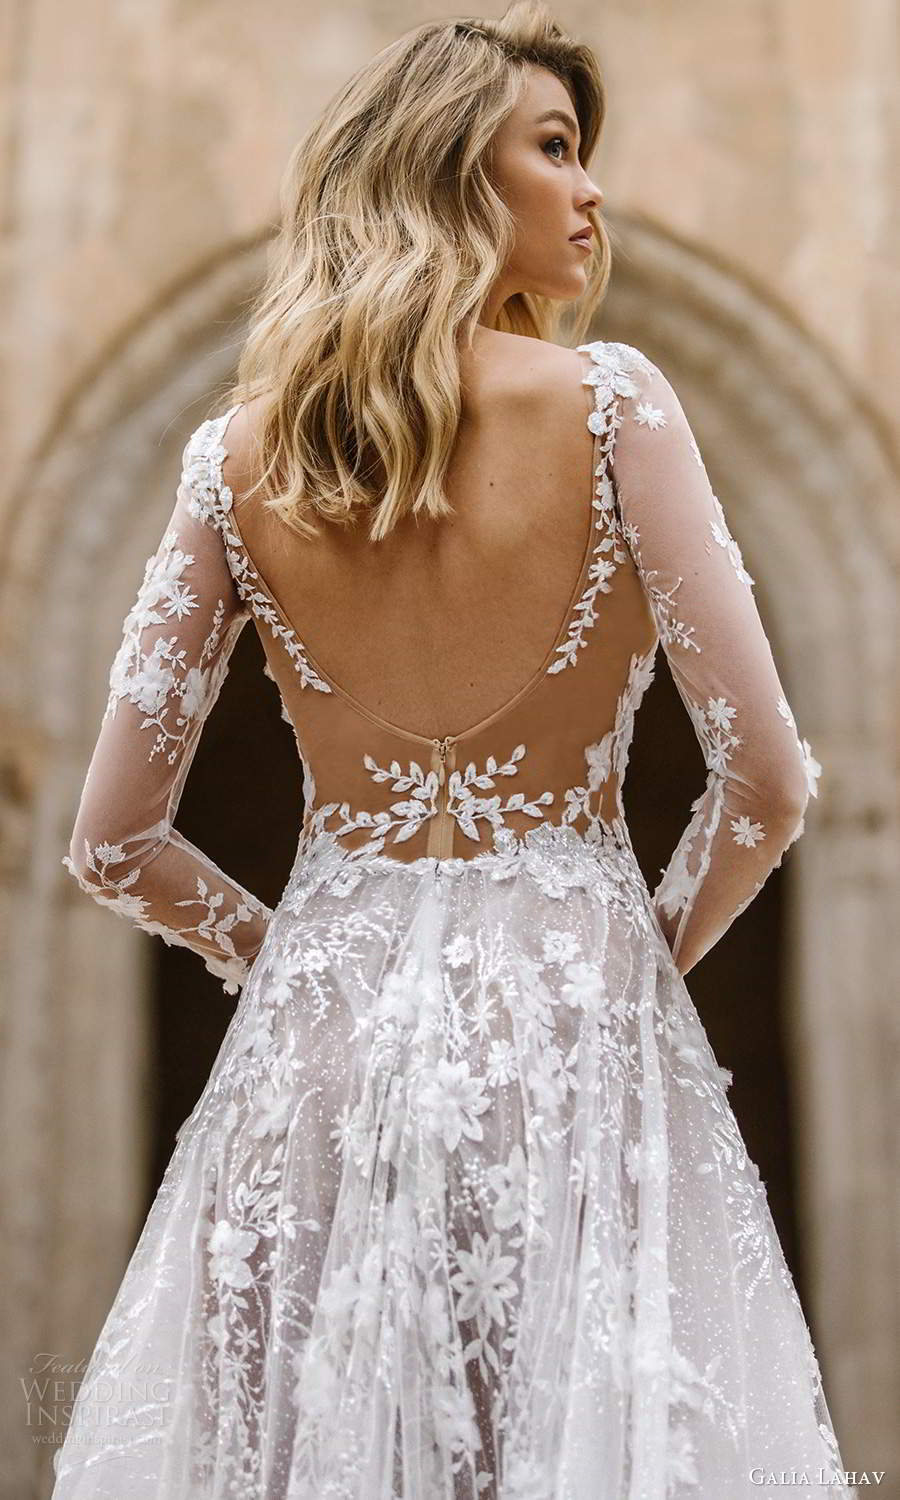 galia lahav fall 2020 gala bridal illusion long sleeves plunging v neckline fully embellished lace a line ball gown wedding dress chapel train scoop back (1) zbv